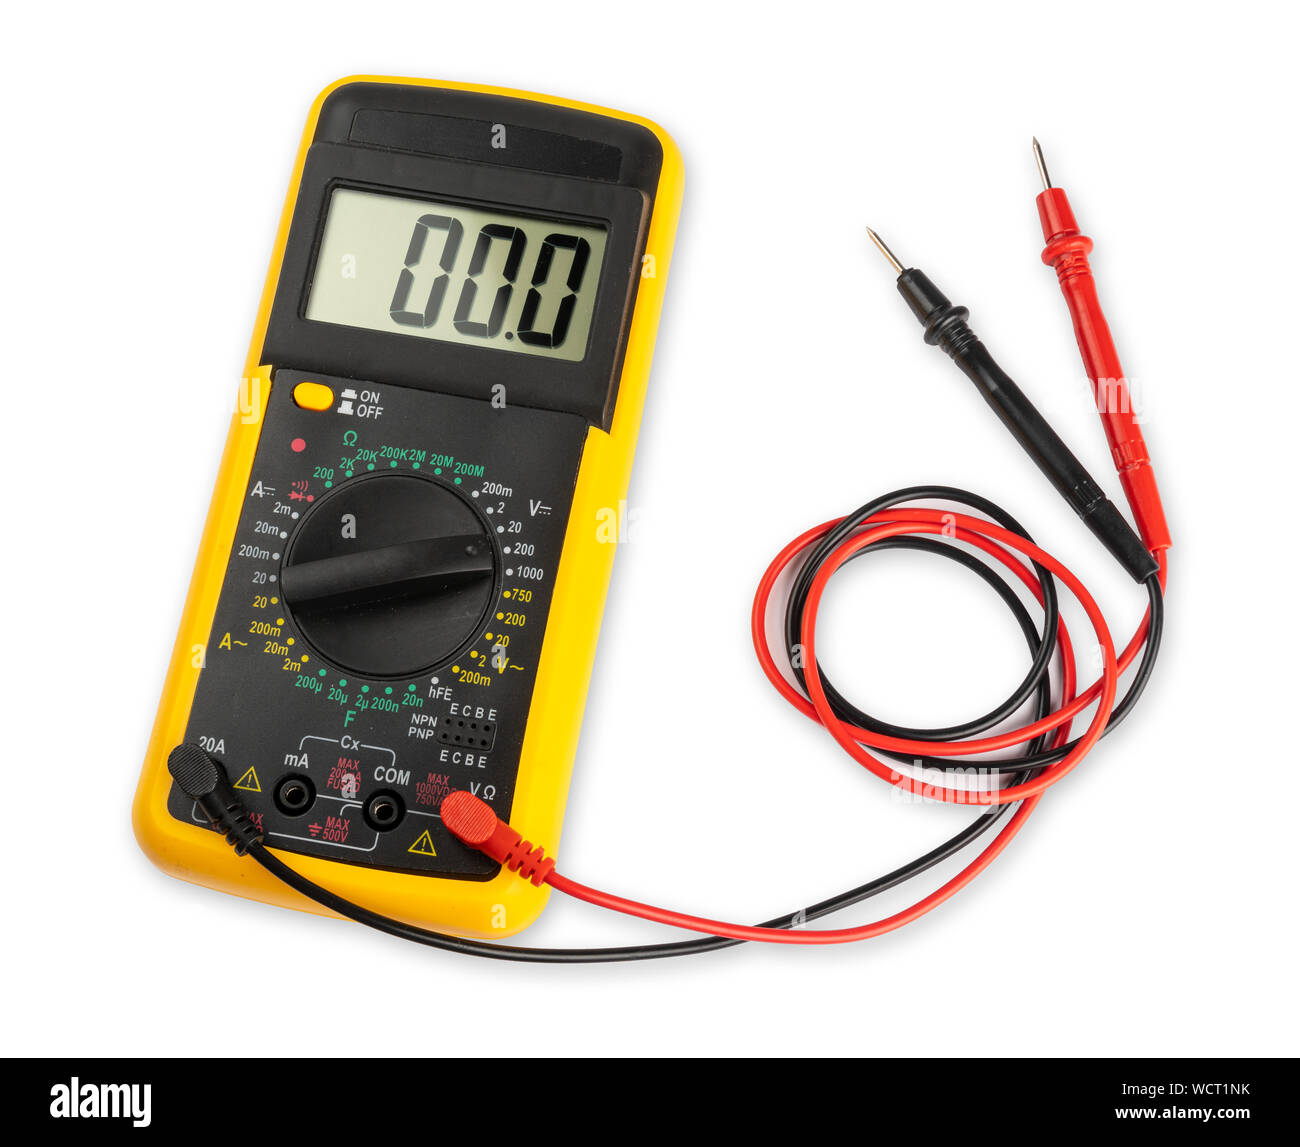 Yellow digital multimeter electronic measurement device tool with red and black cables isolated on white background. Installation service concept Stock Photo